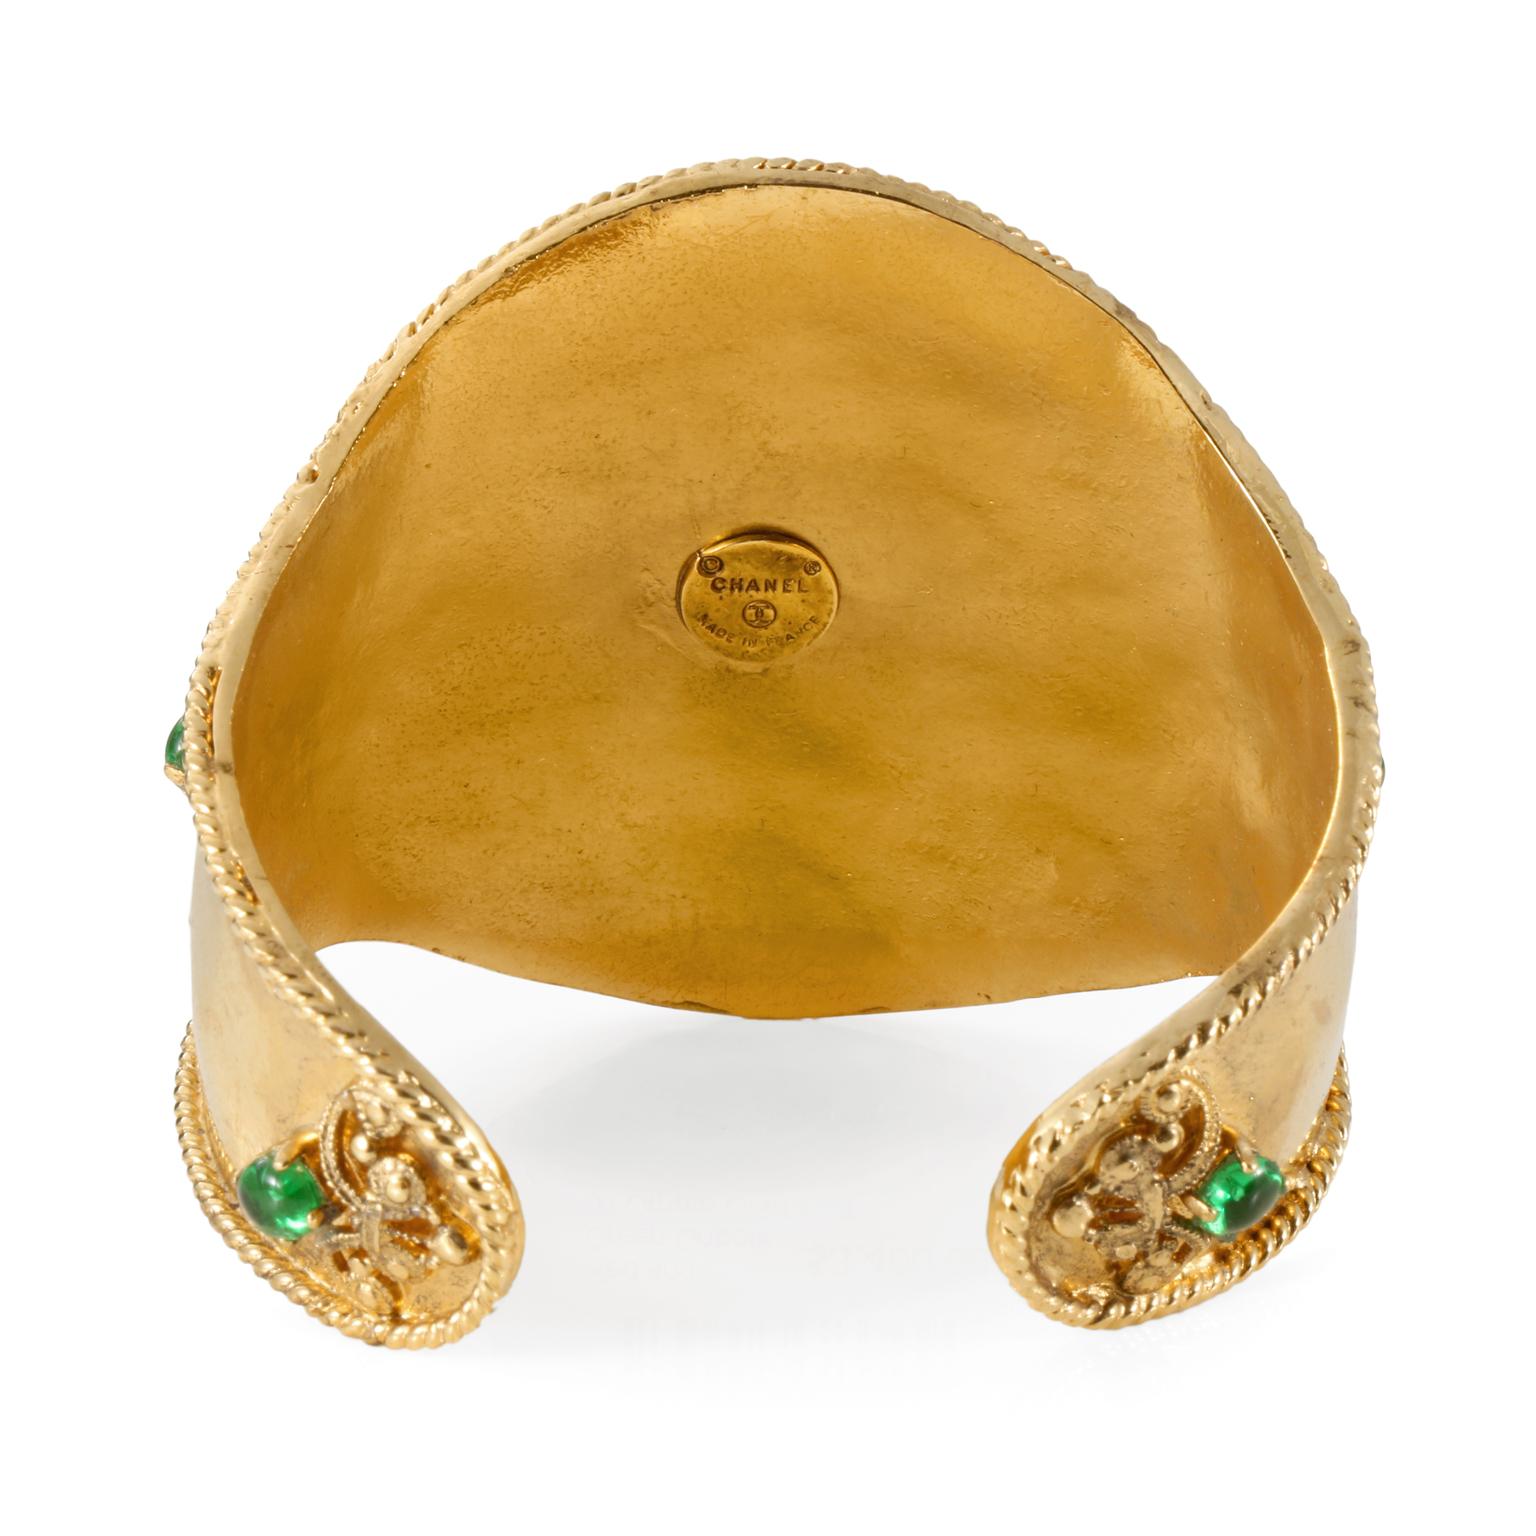 Byzantine Chanel Red and Green Gripoix Gold Ornate Cuff